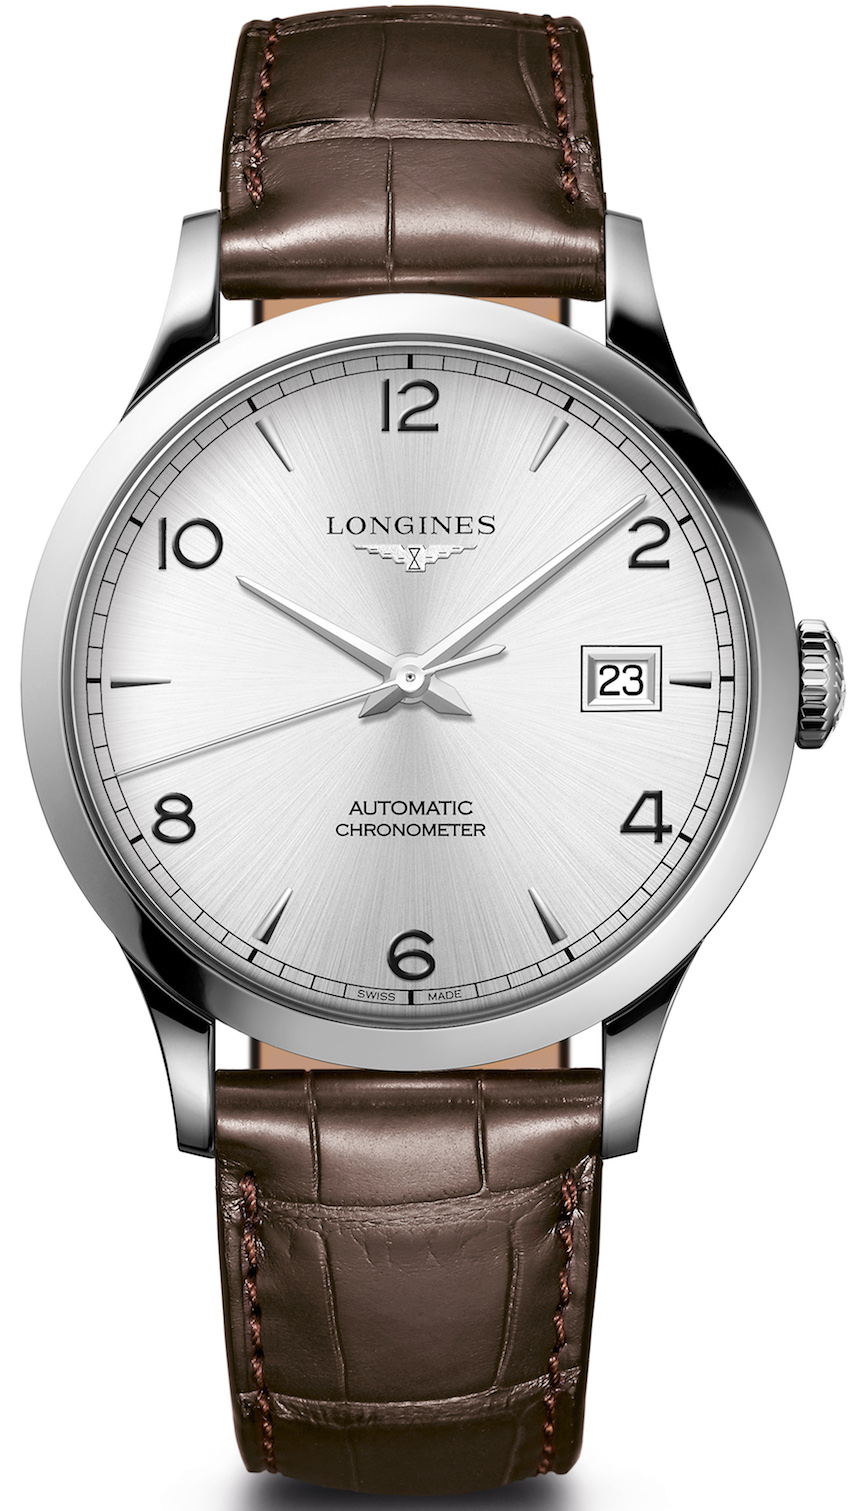 Longines Record Watches Are Brand's First COSC-Certified Collection Watch Releases 